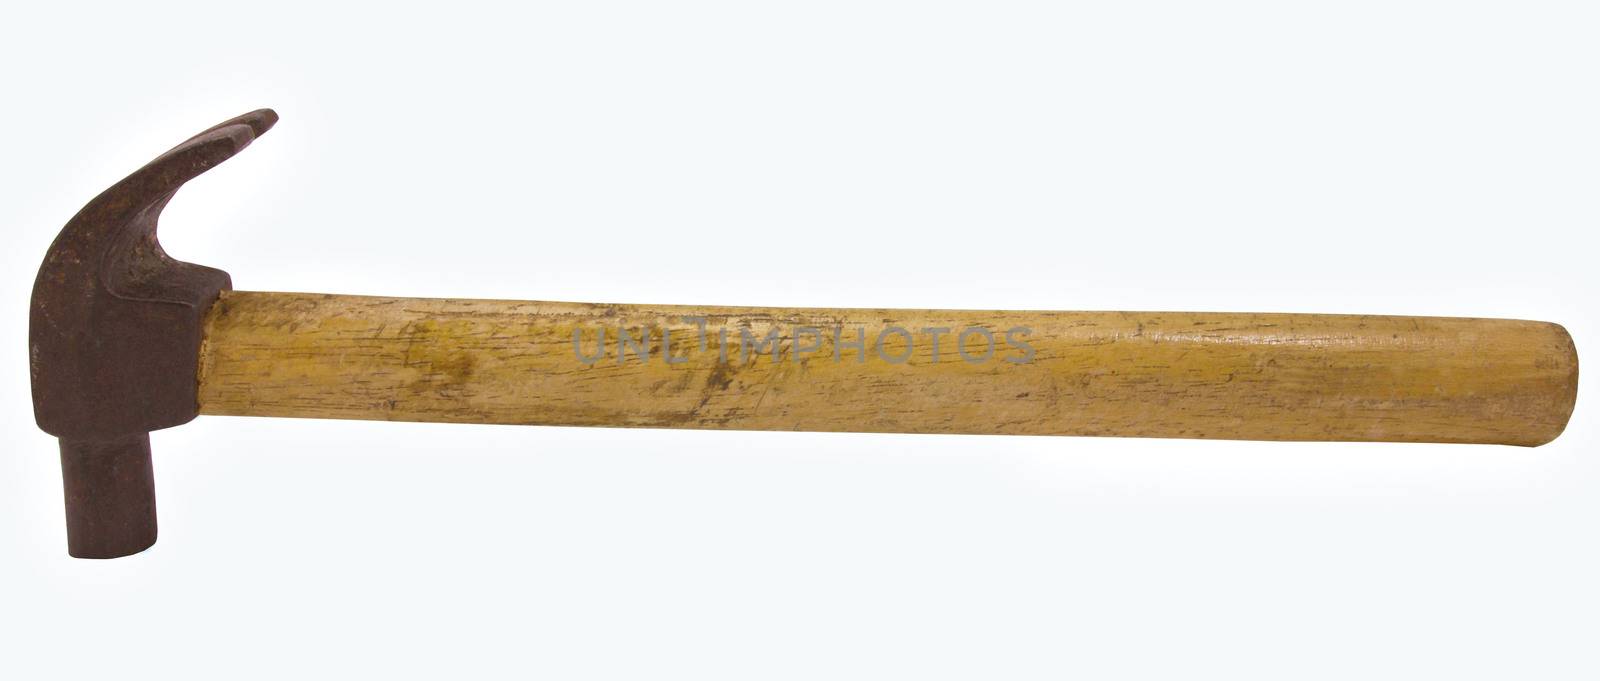 Old hammer with clipping path by sutipp11